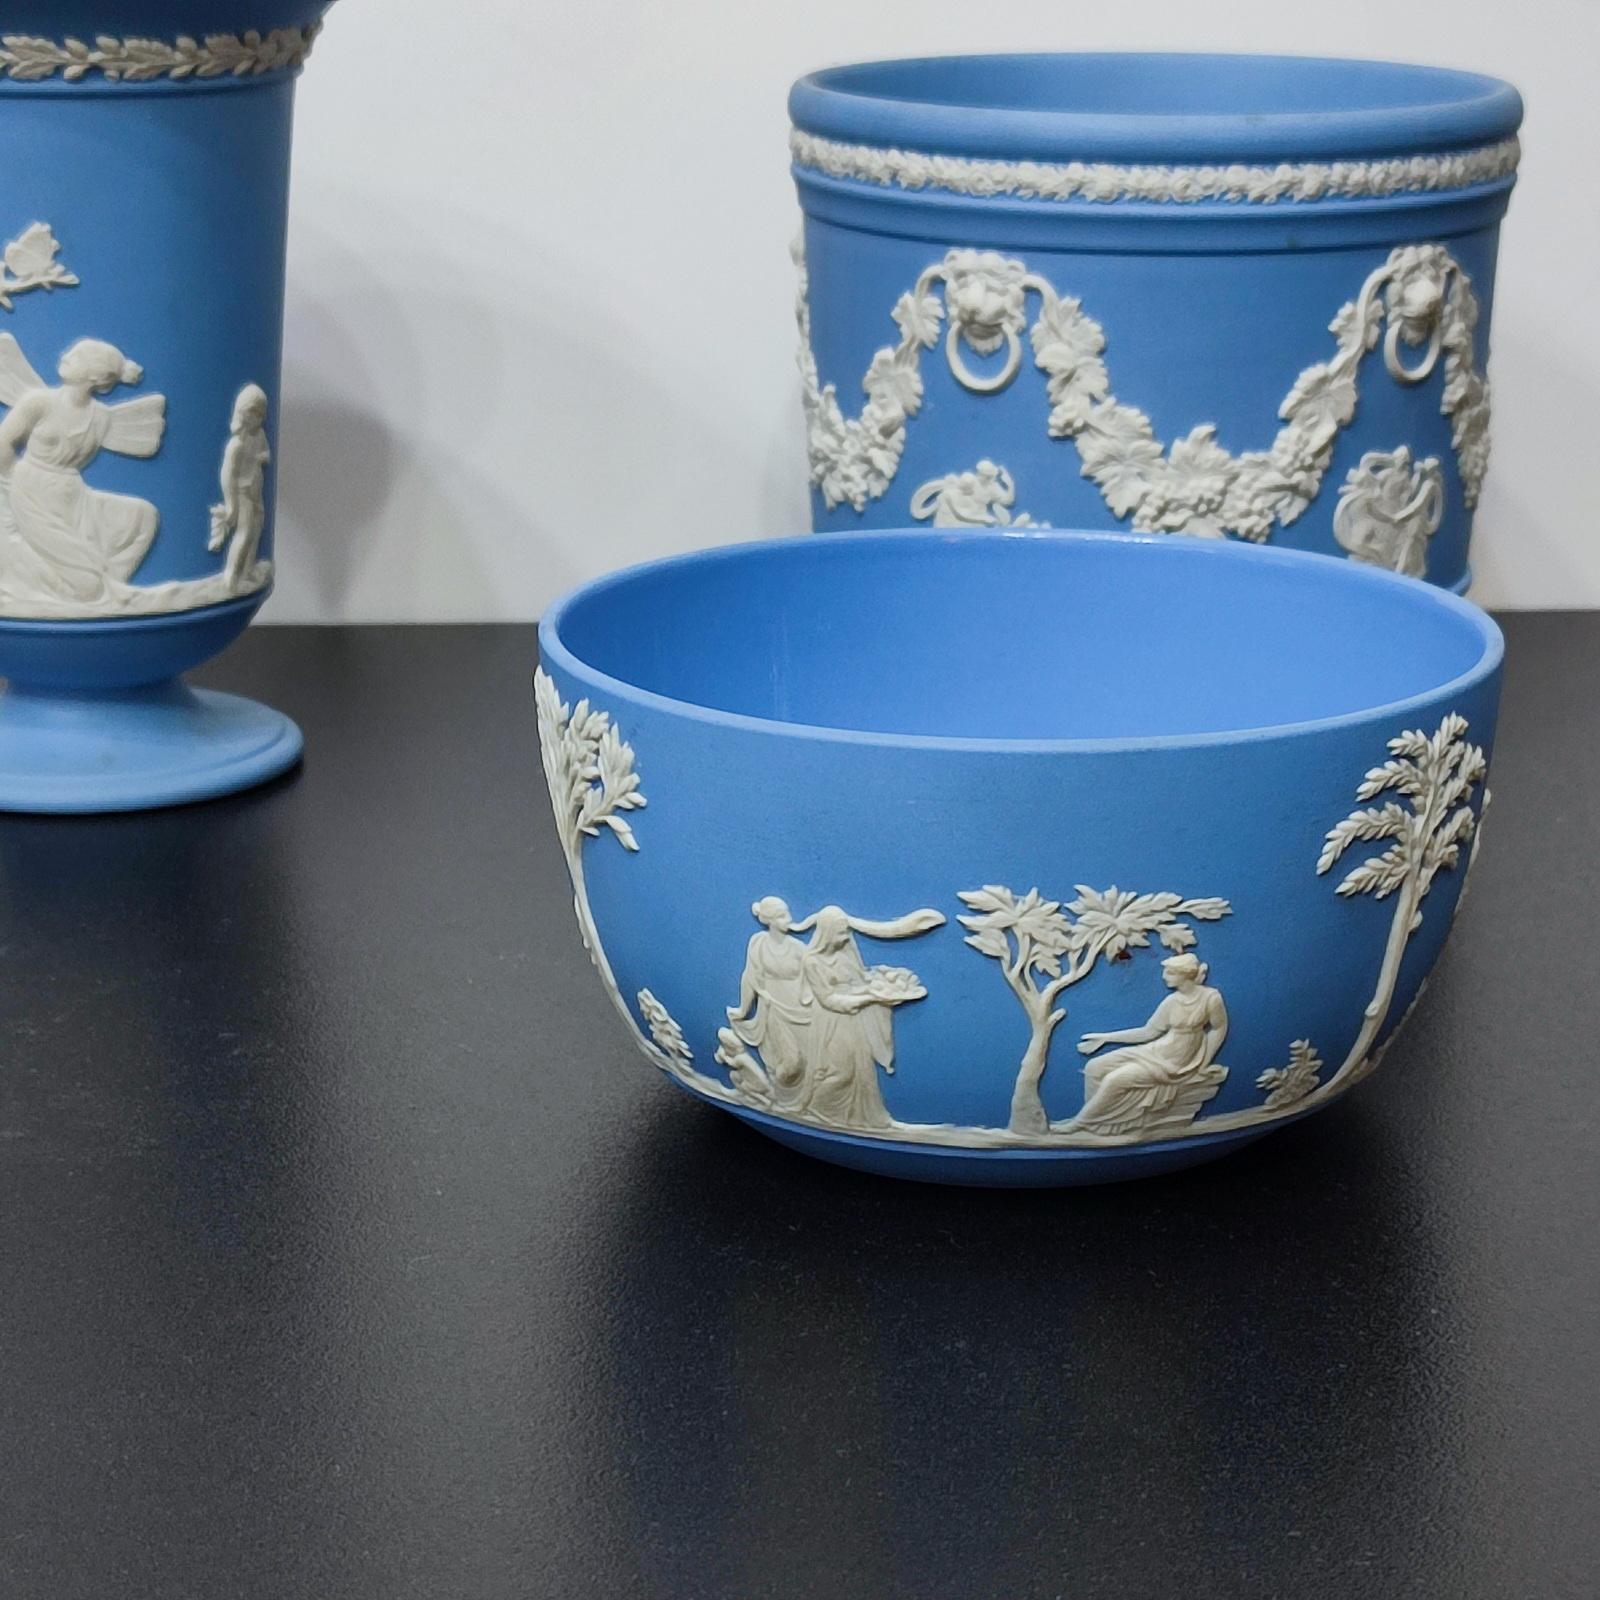 Wedgwood Blue Jasper Ware Vessels Classical Scenes, Collection of 3, FREESHIP For Sale 2